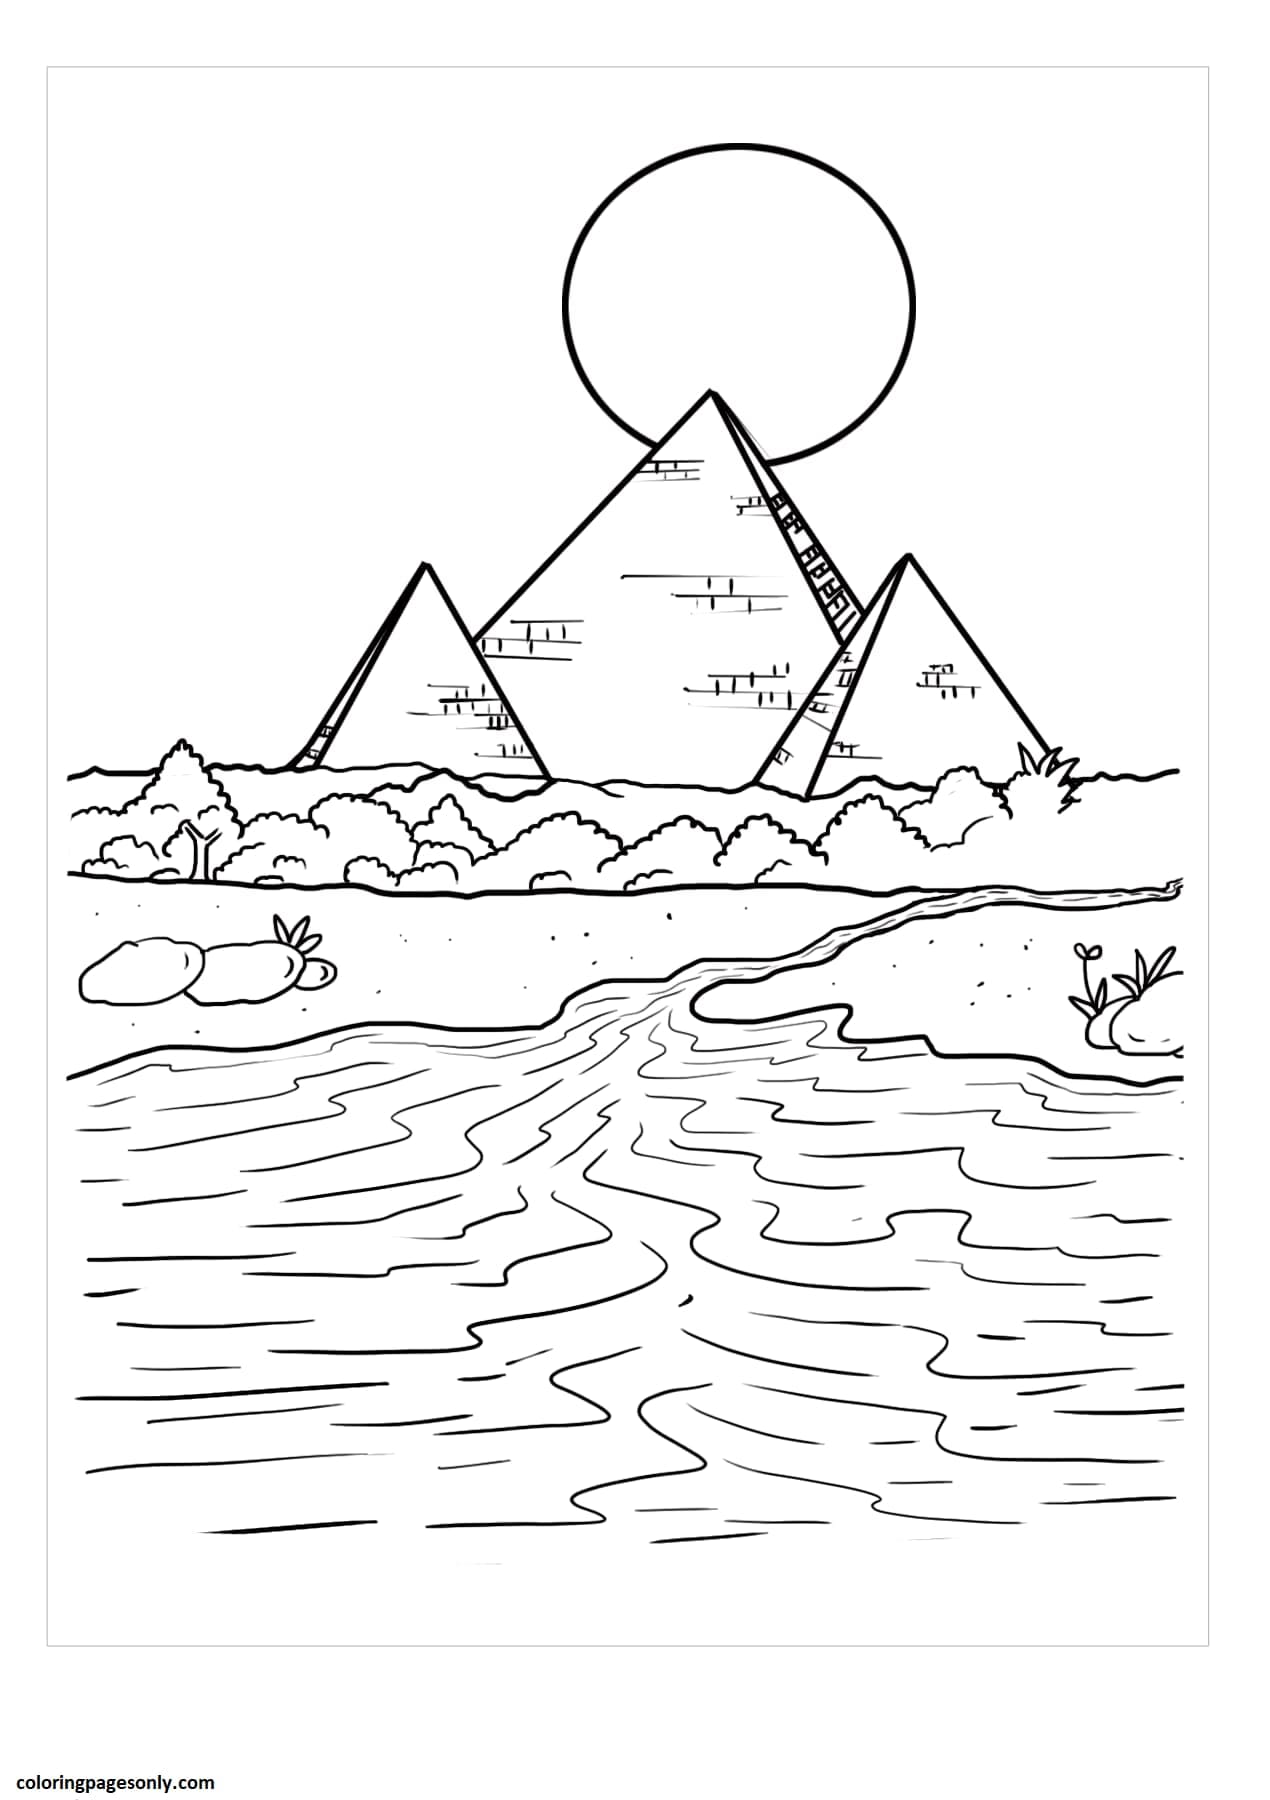 Nile River Coloring Pages